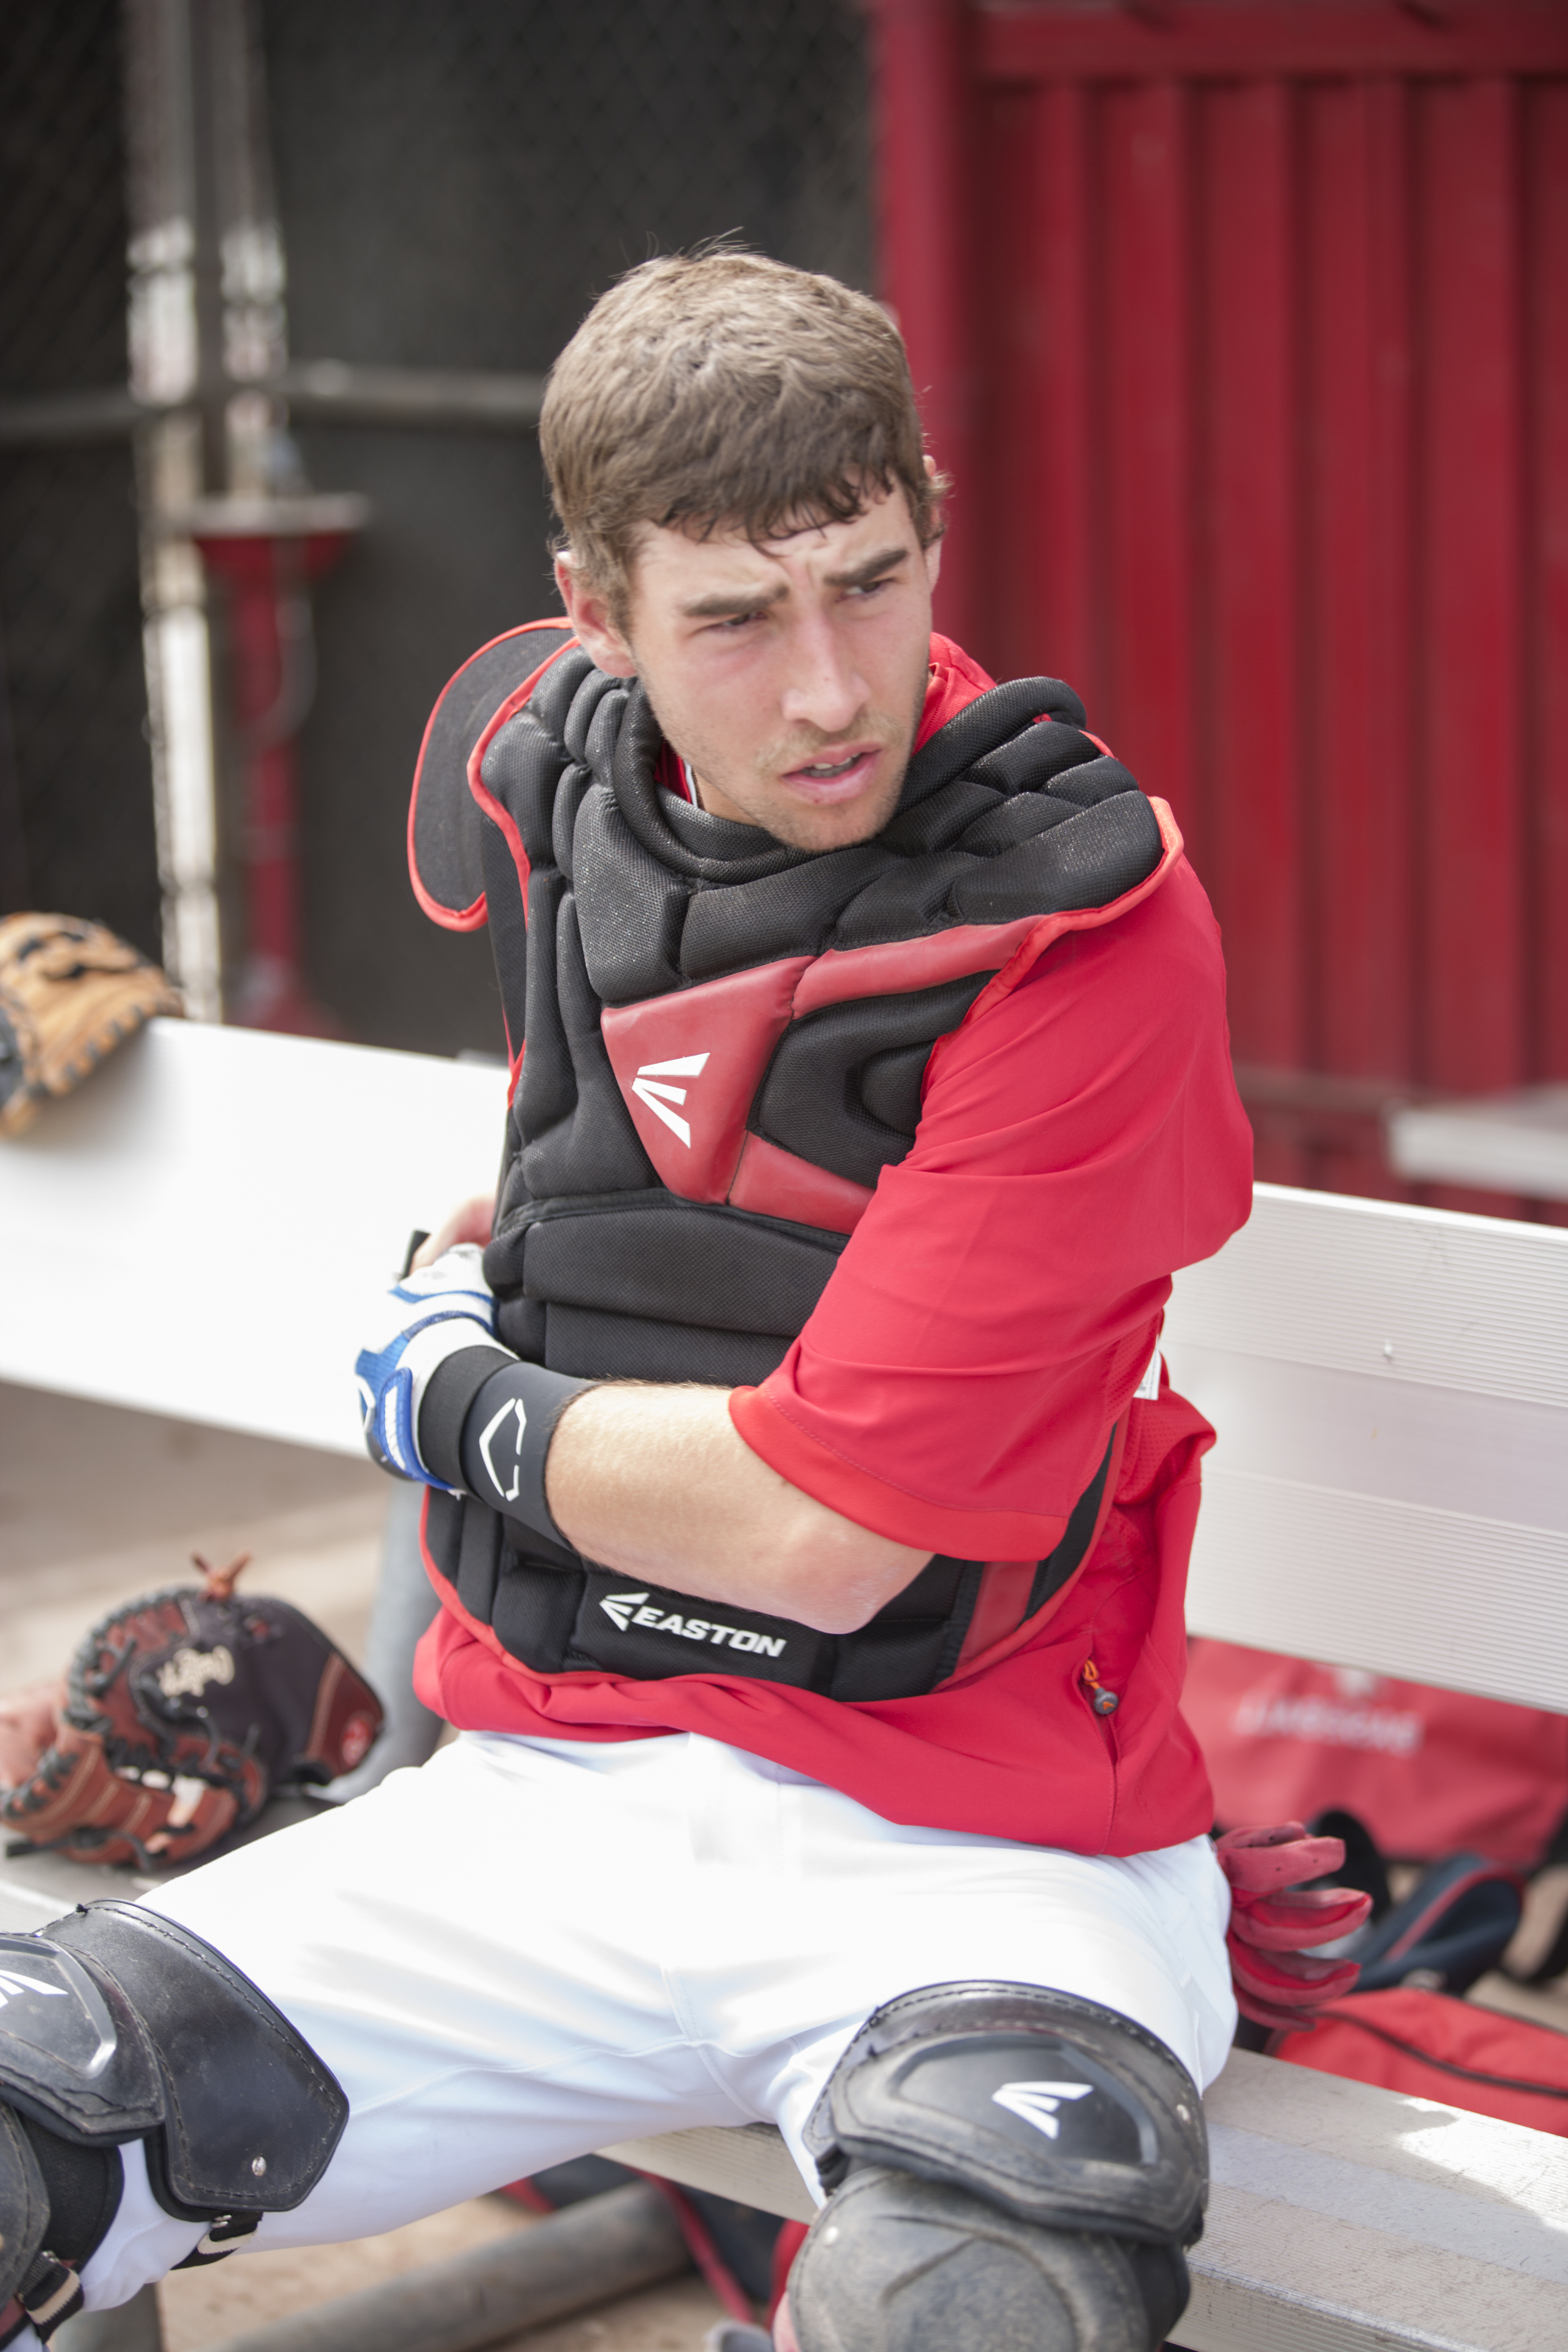  Evan Yeager suits up in a protective catcher's gear in the home team dugout at Joe Kelly Field on Tuesday, March 10, 2015. Woodland Hills, Calif.  Read the full story&nbsp; here  